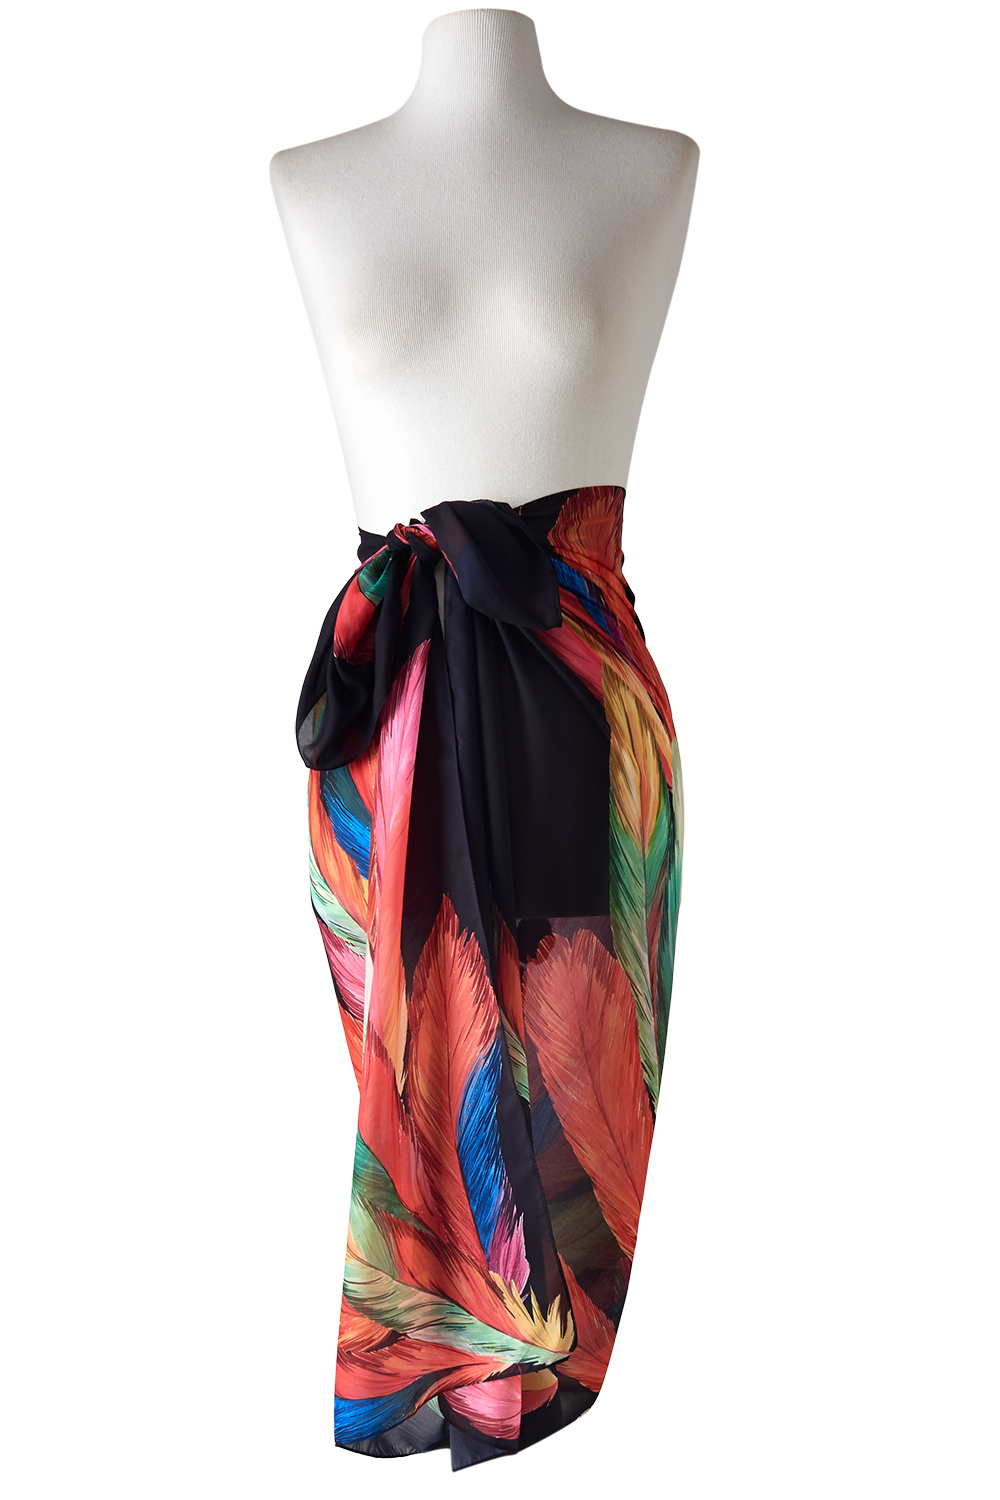 MAX SCARF FEATHERS WATERCOLOR 130X130 | POLYESTER MOUSSELINE